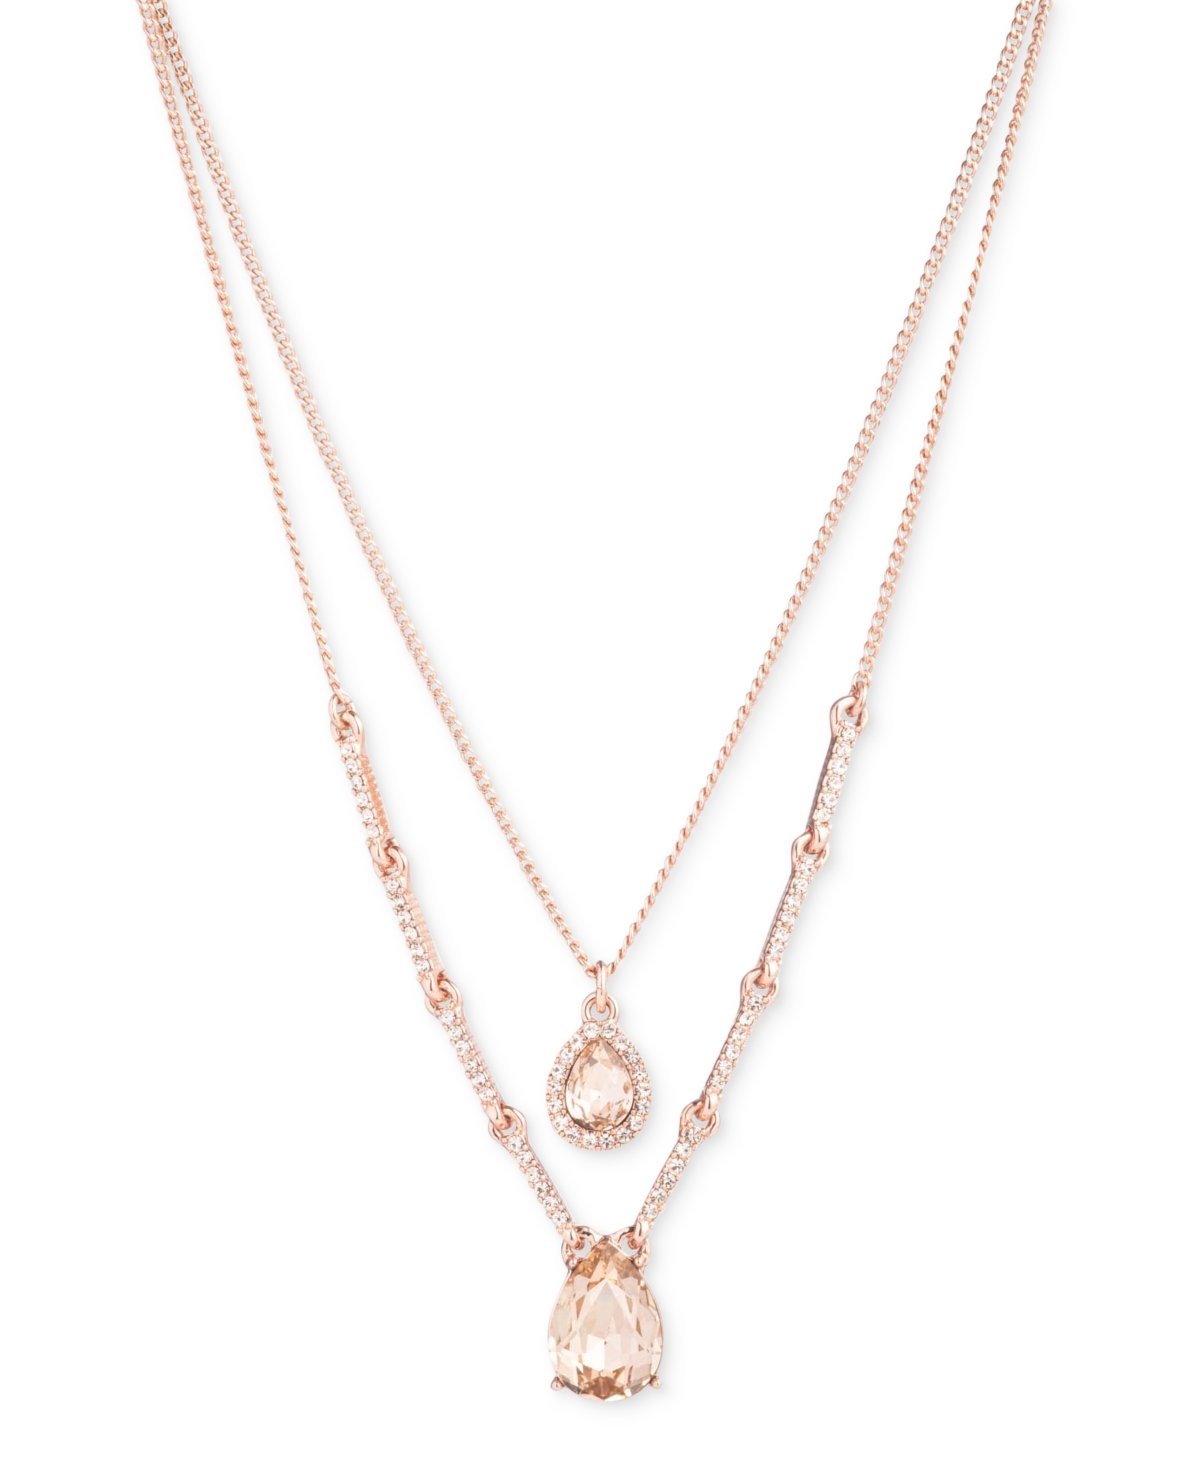 Givenchy Multi Stone Two Row Pendant Necklace, 16" + 3" Extender In Pink